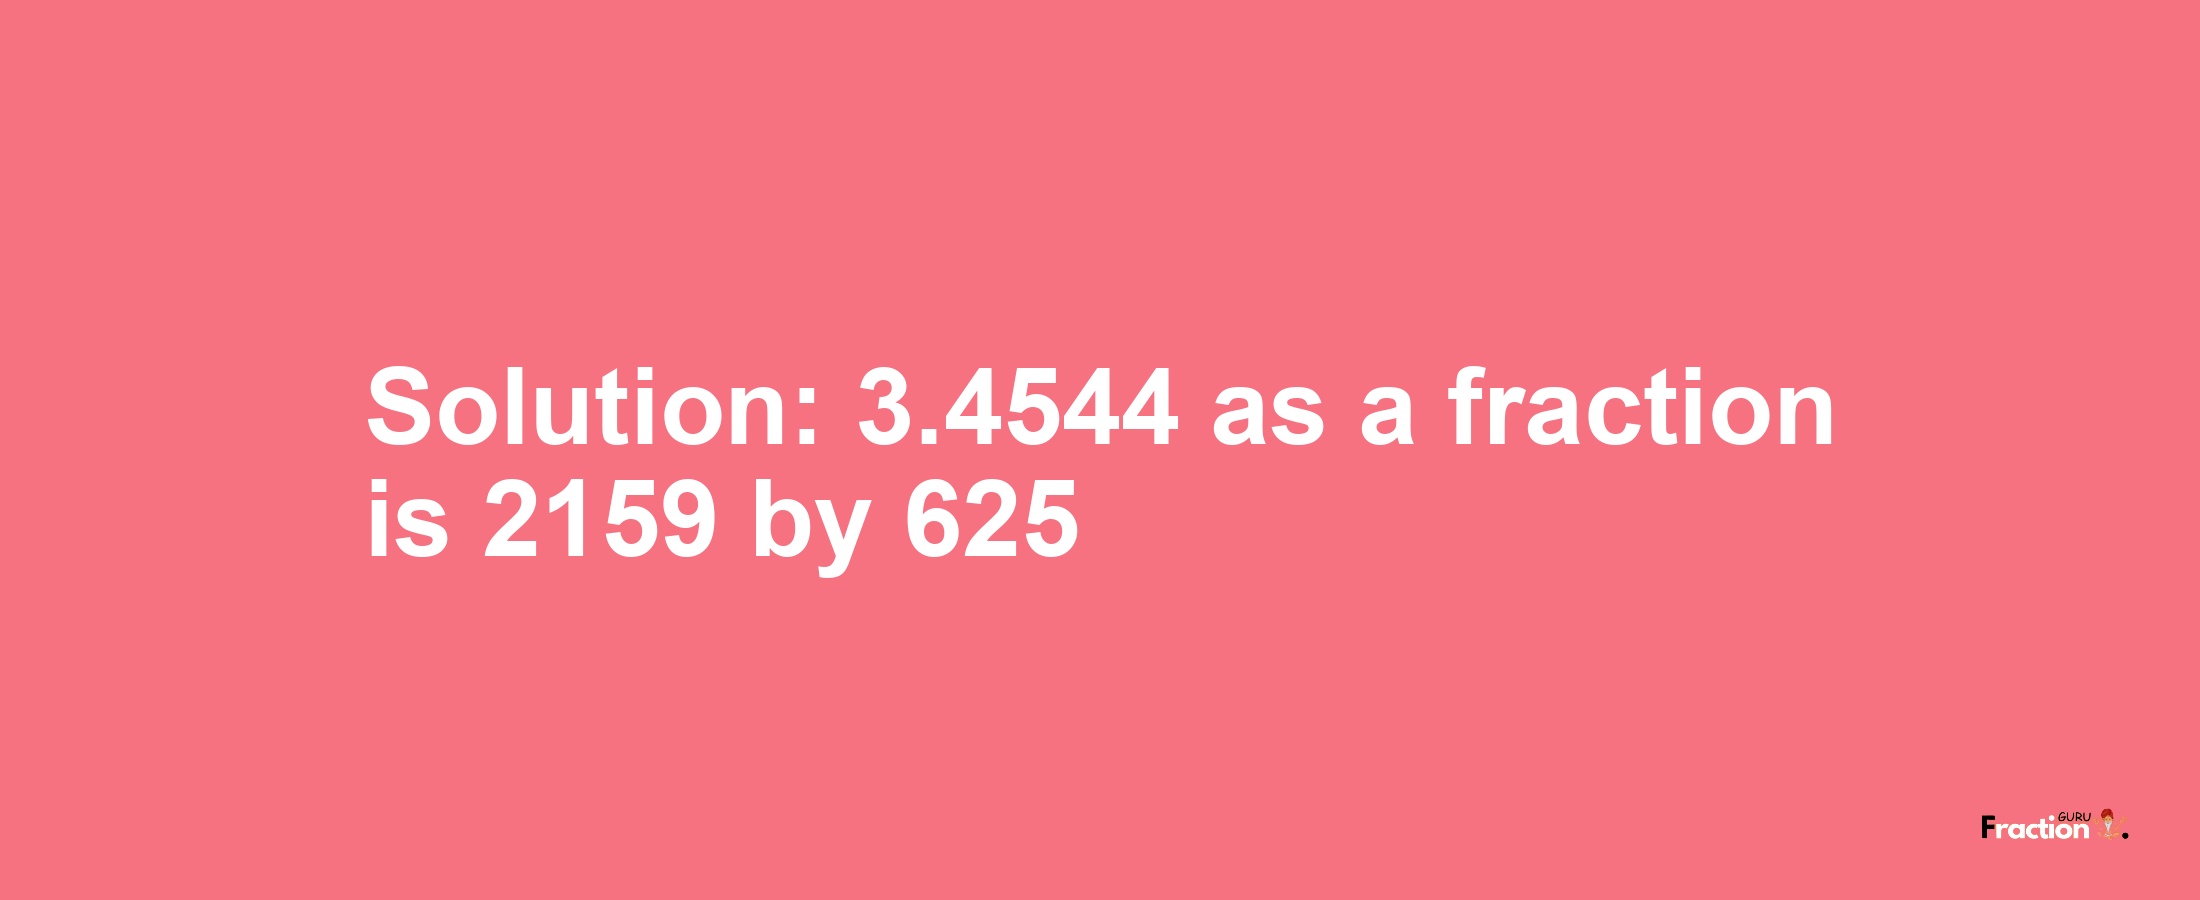 Solution:3.4544 as a fraction is 2159/625